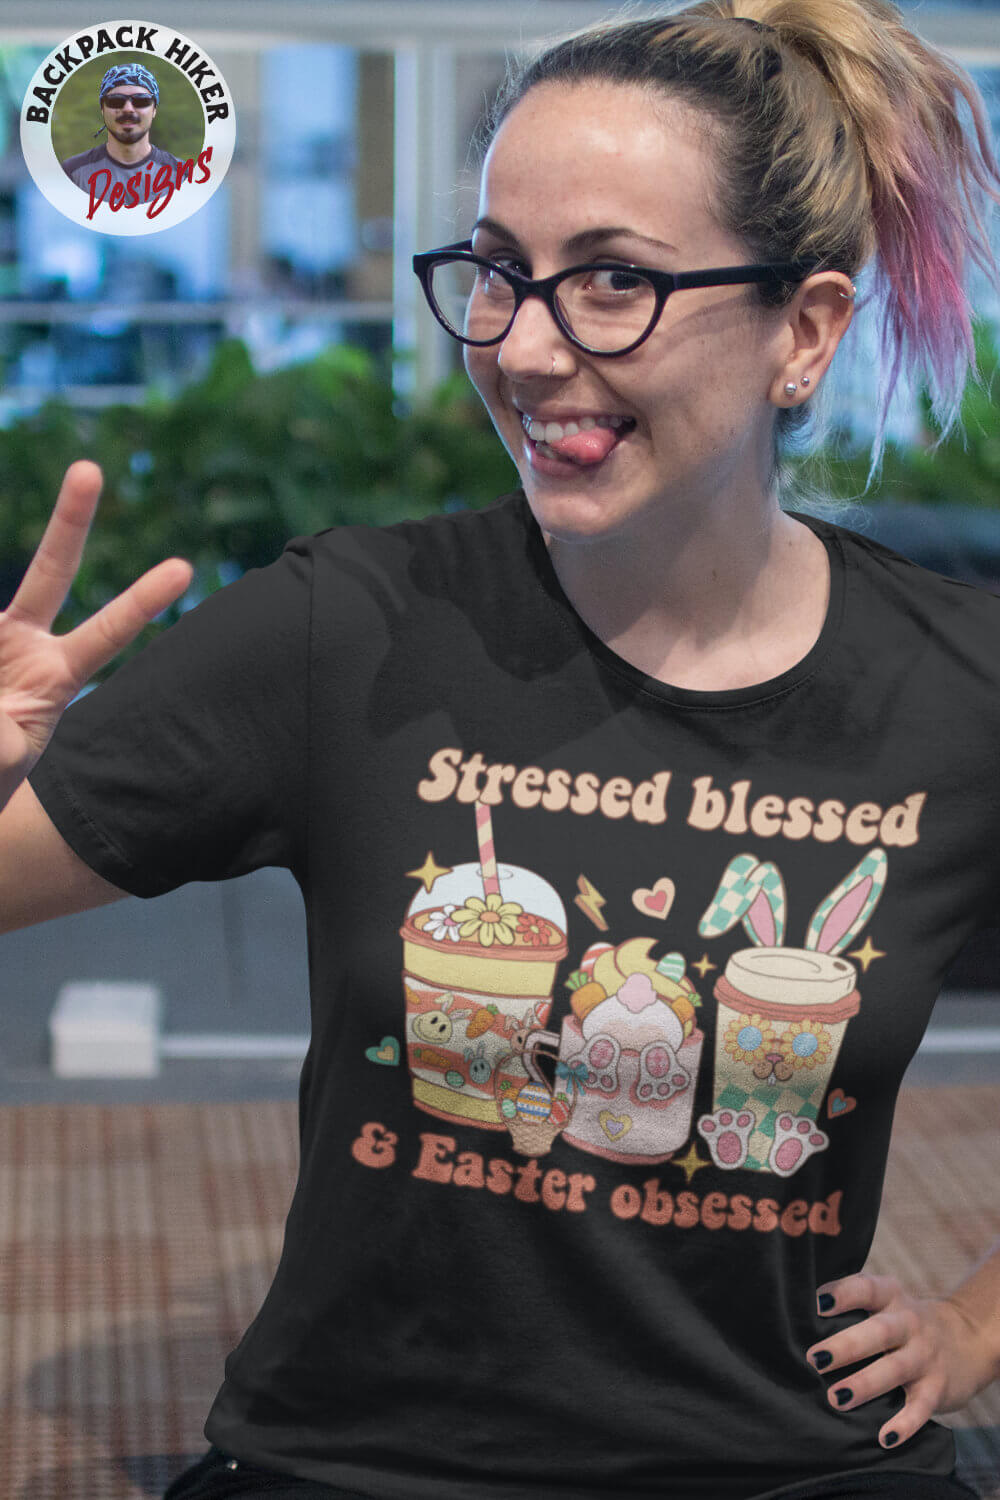 Cadou de Paste - Tricou Retro Groovy - Stressed blessed and easter obsessed